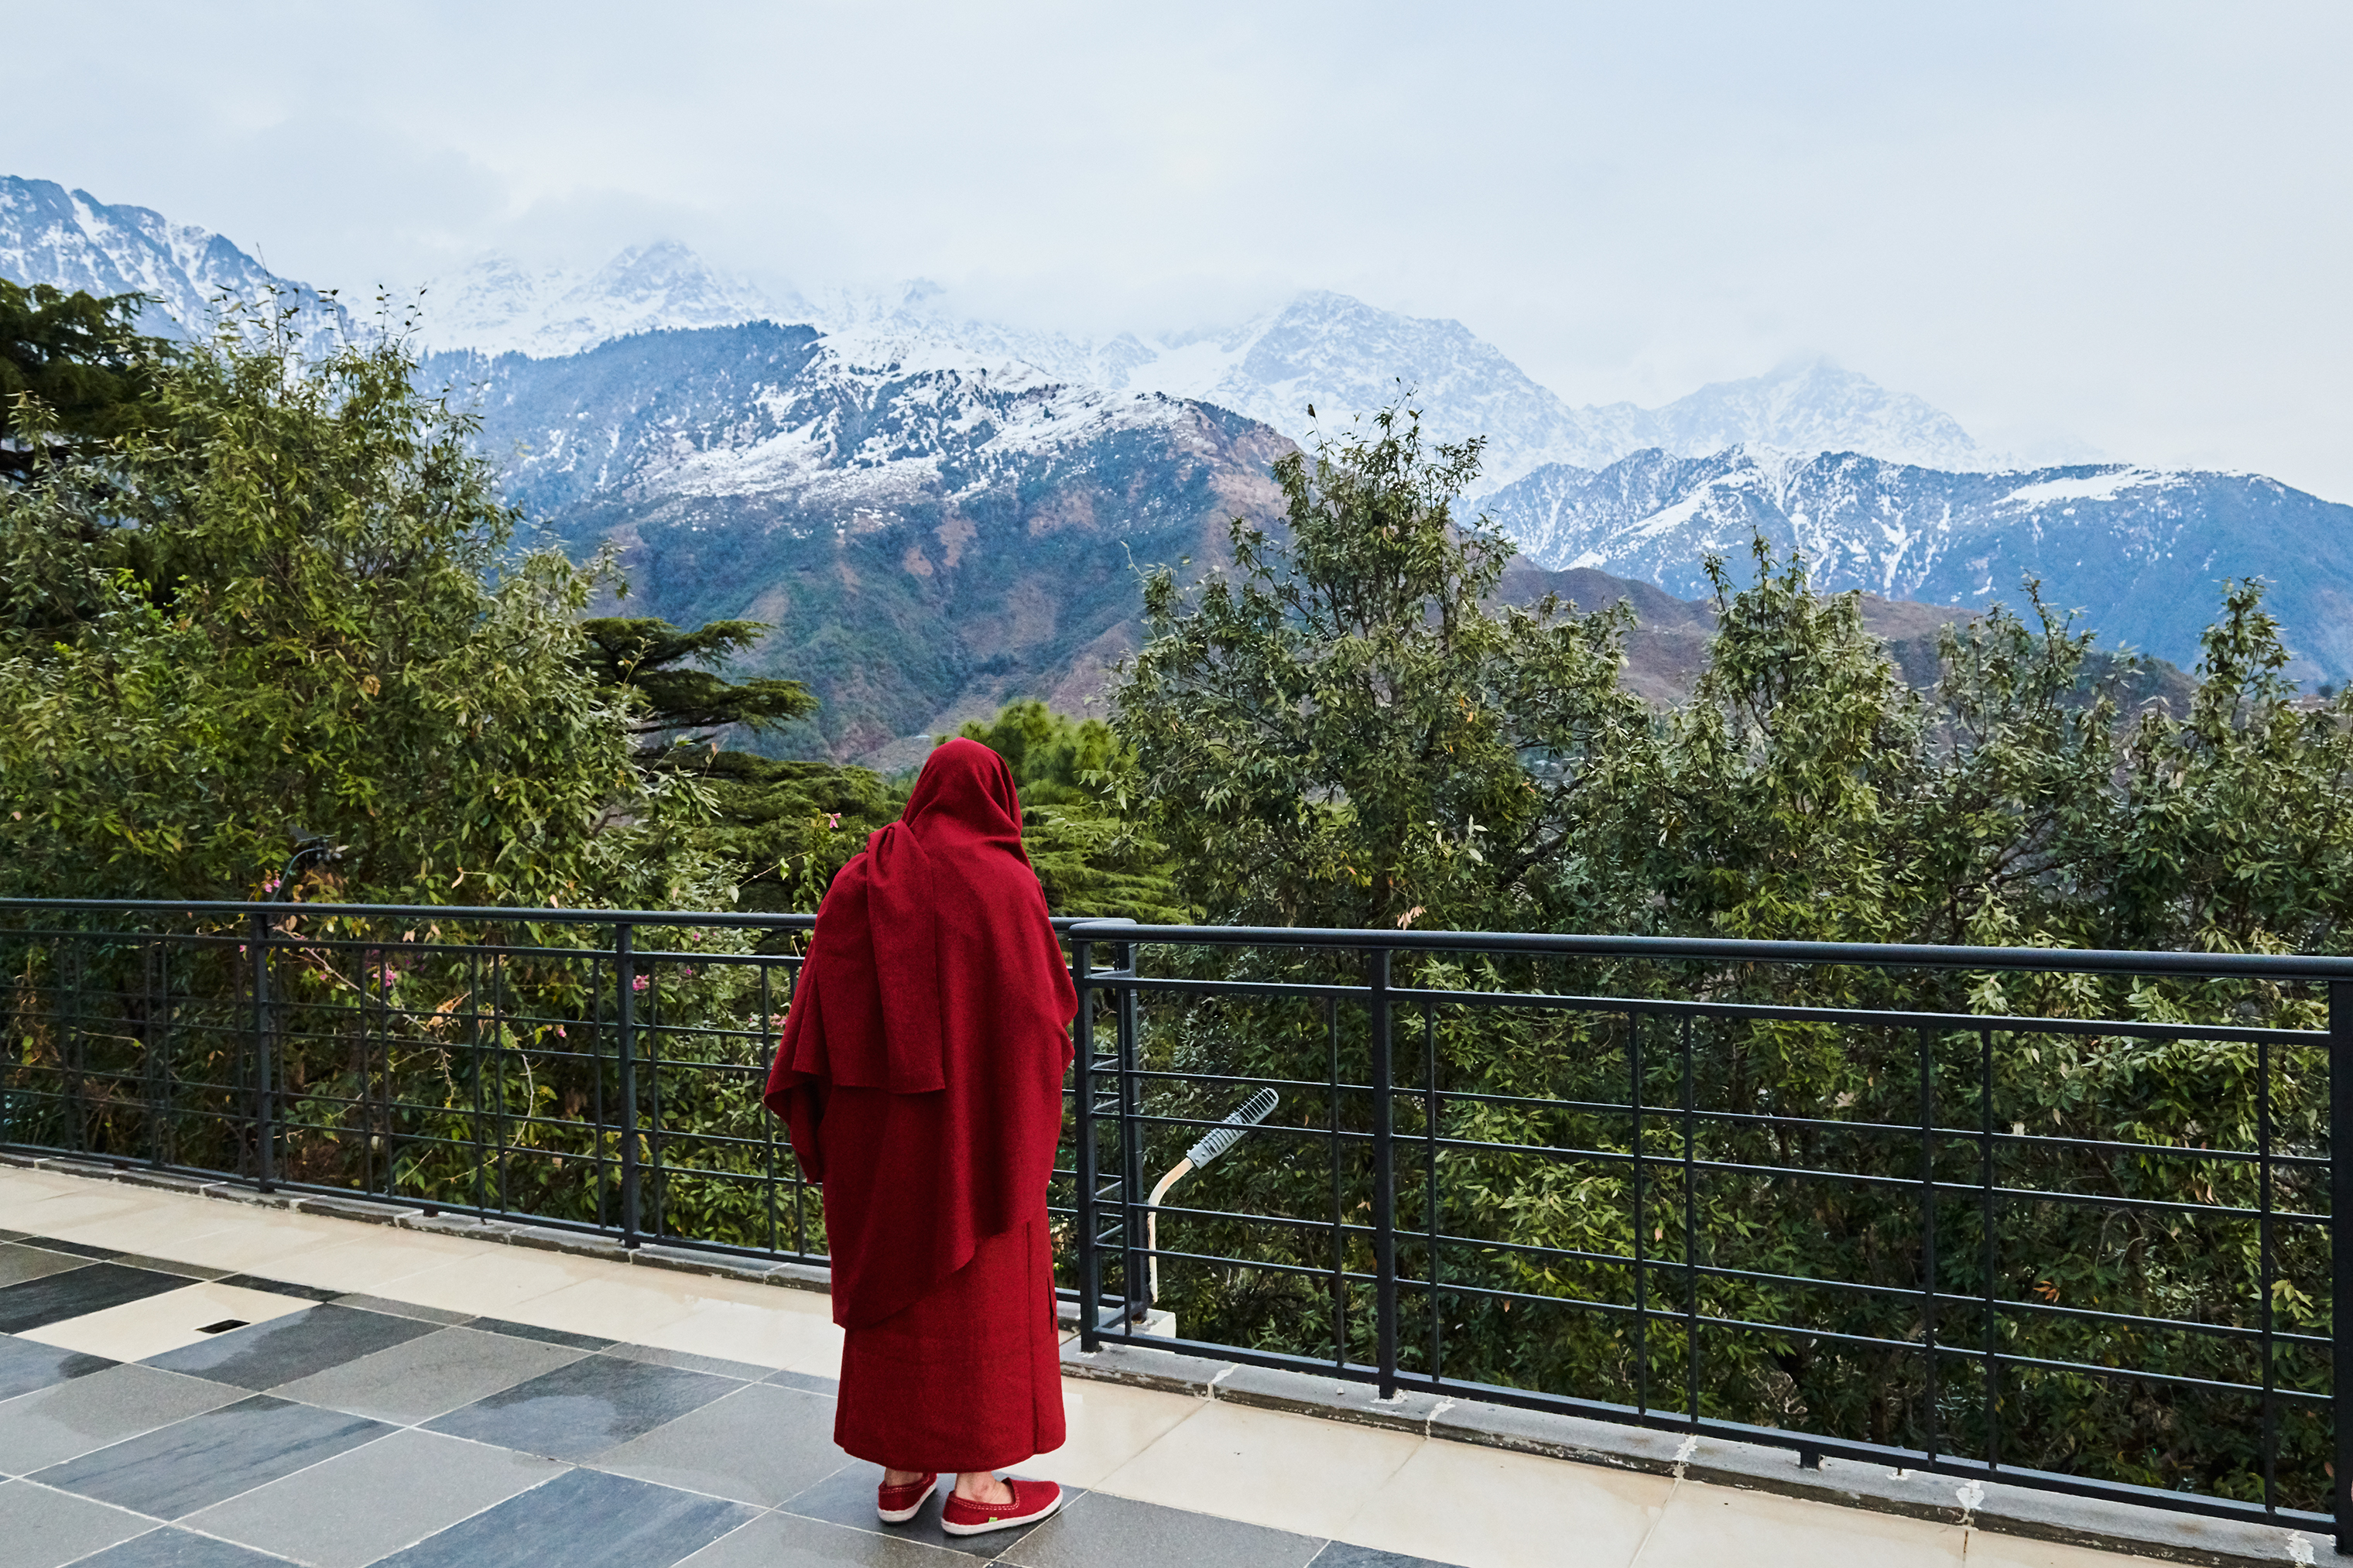 Six decades on, the Dalai Lama, photographed in February, still hopes he will visit his birthplace again. March 18 issue. (Ruven Afanador for TIME)